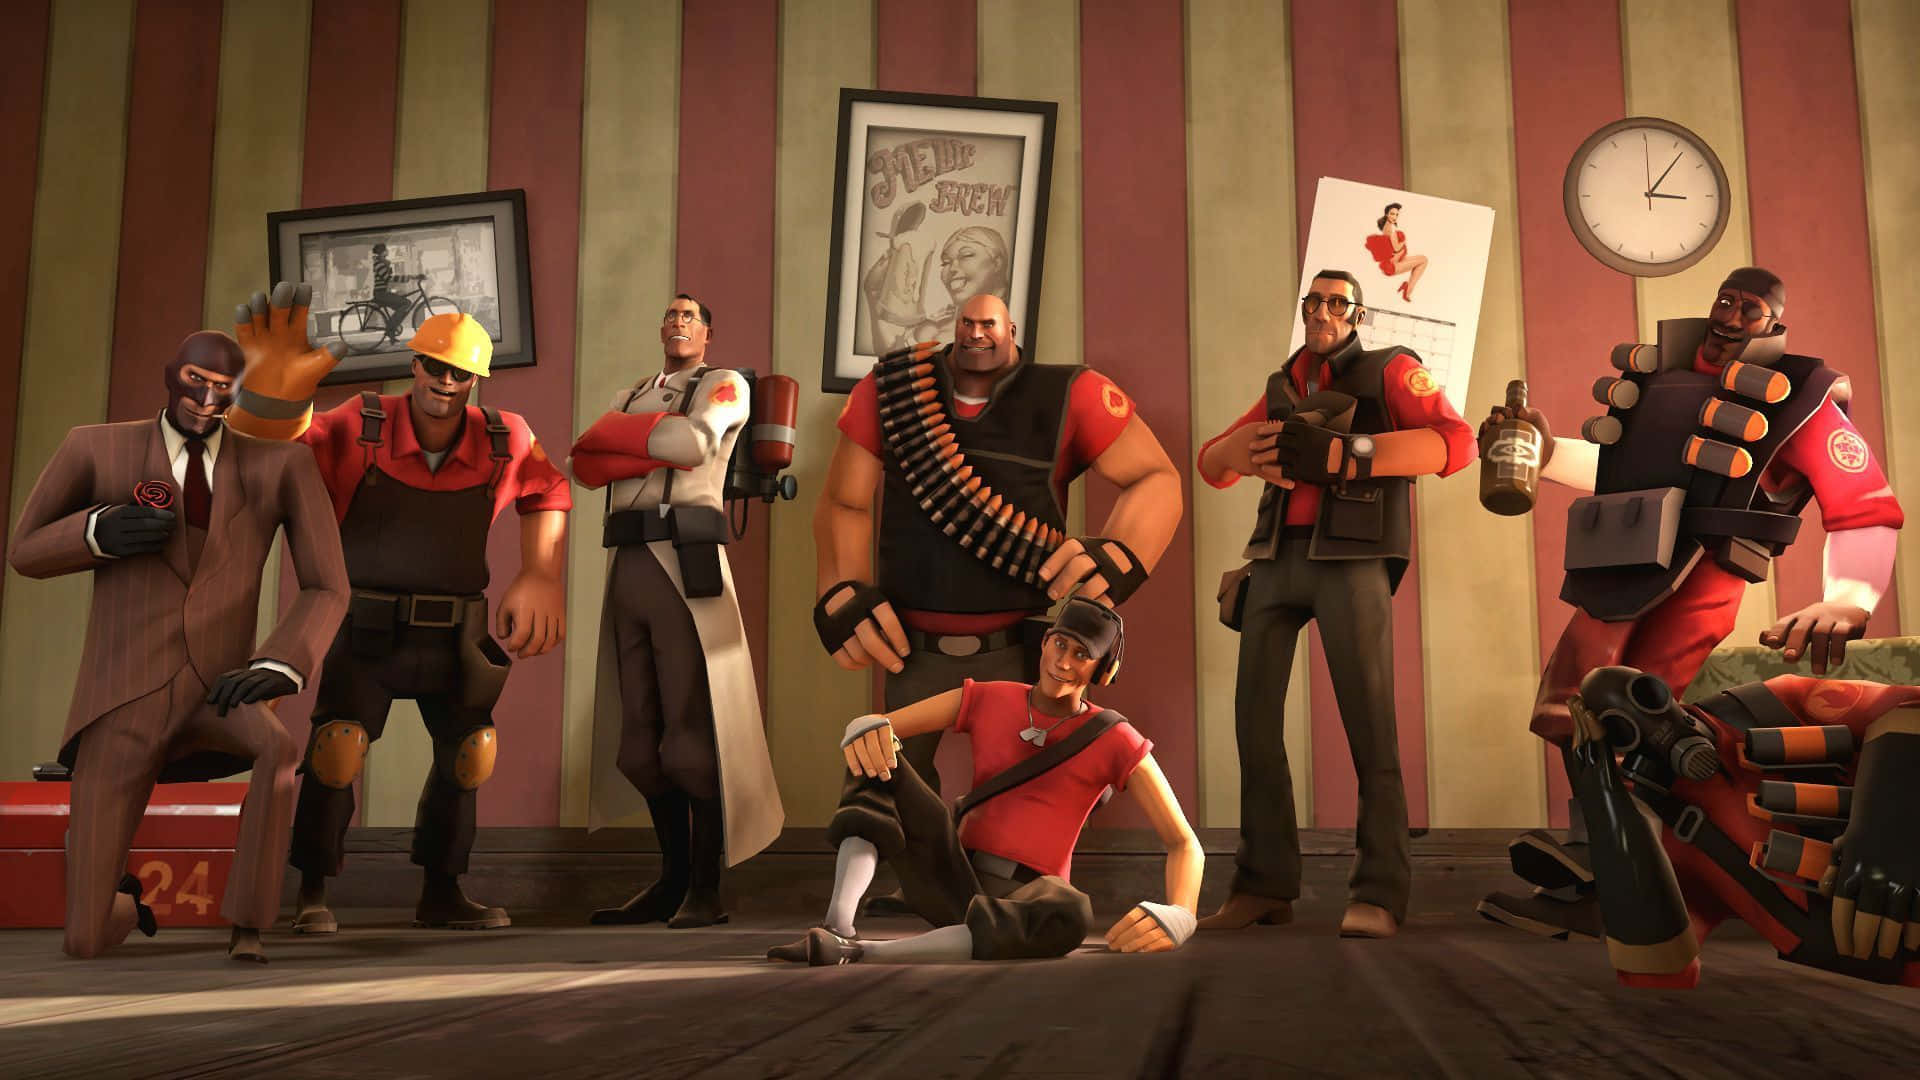 Team Fortress 2 characters lined up for action Wallpaper